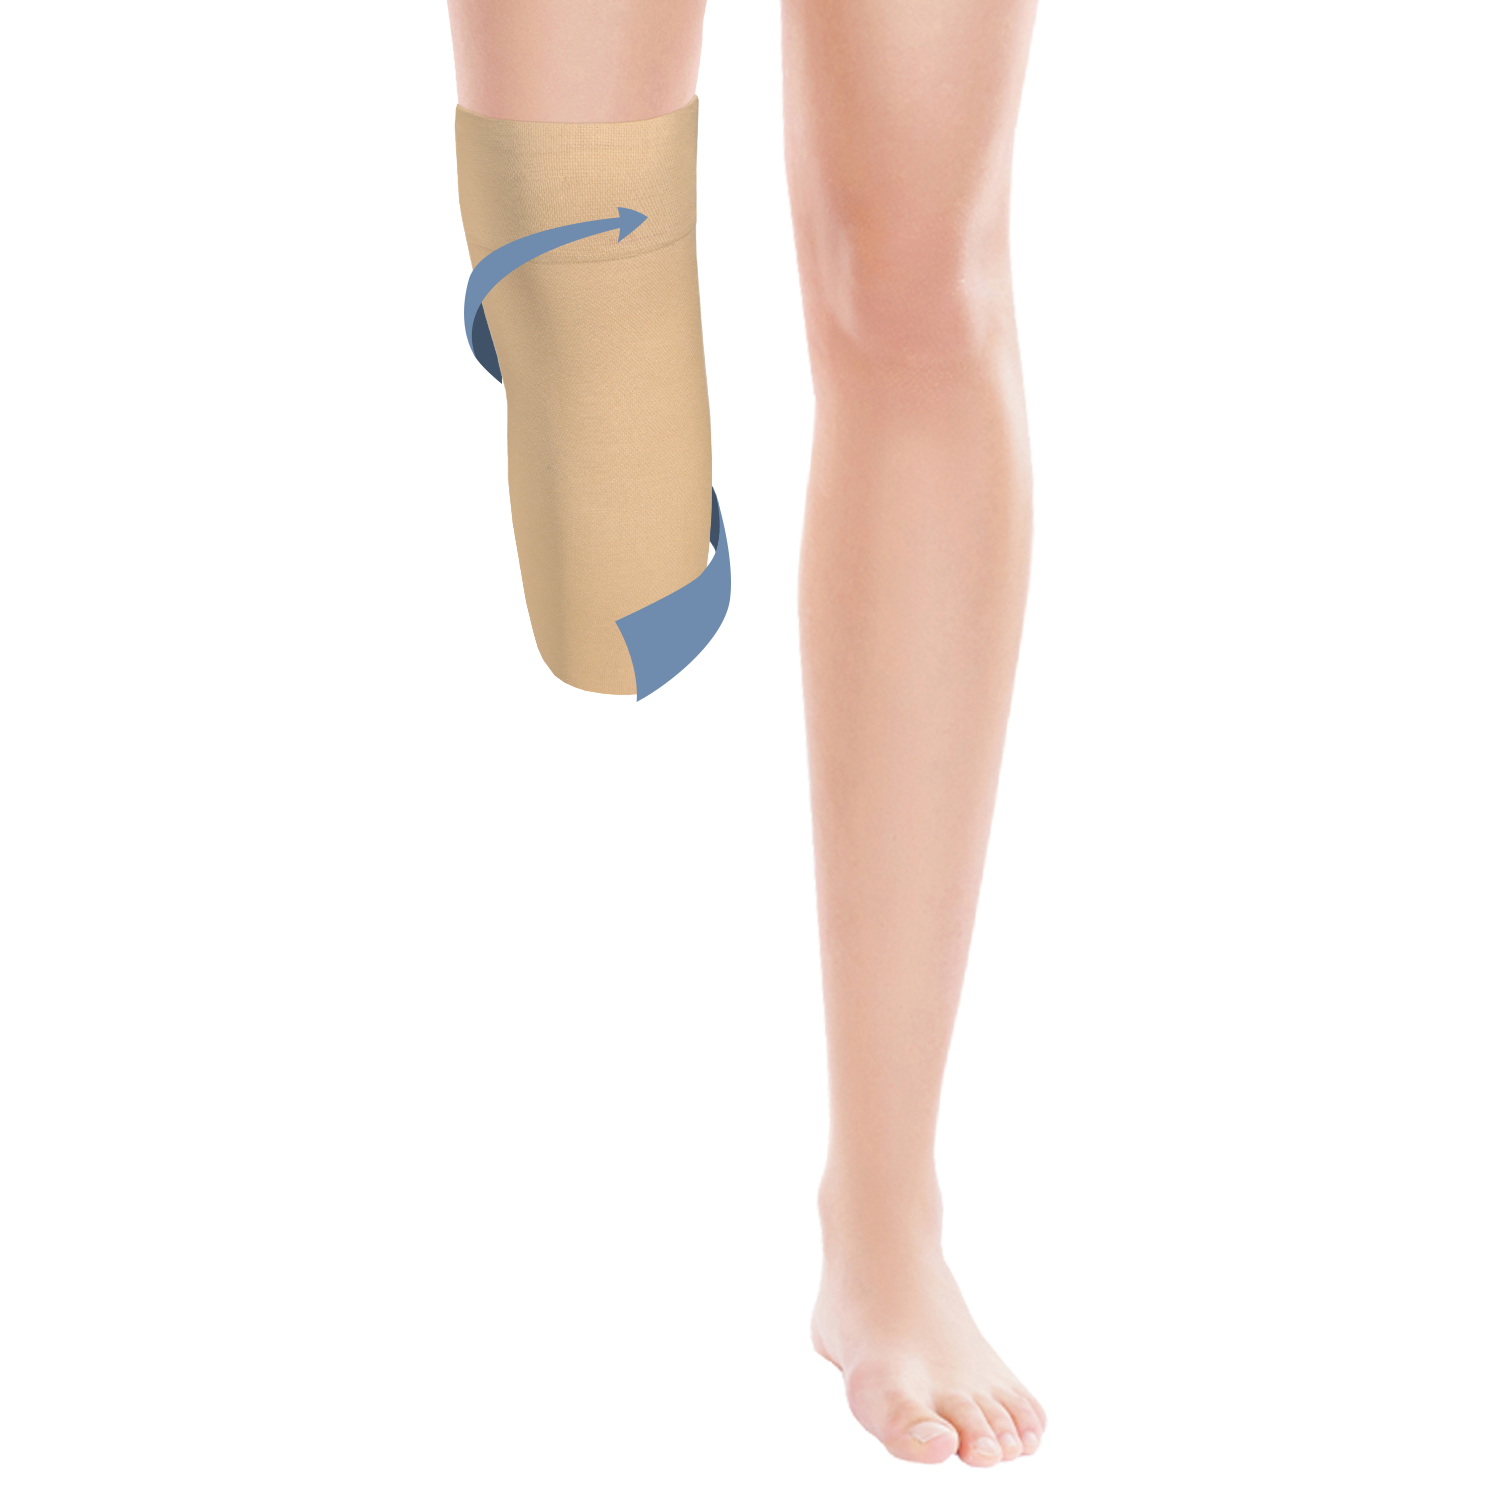 Knee High Medical Stockings With Arrow Travelling Up The Leg